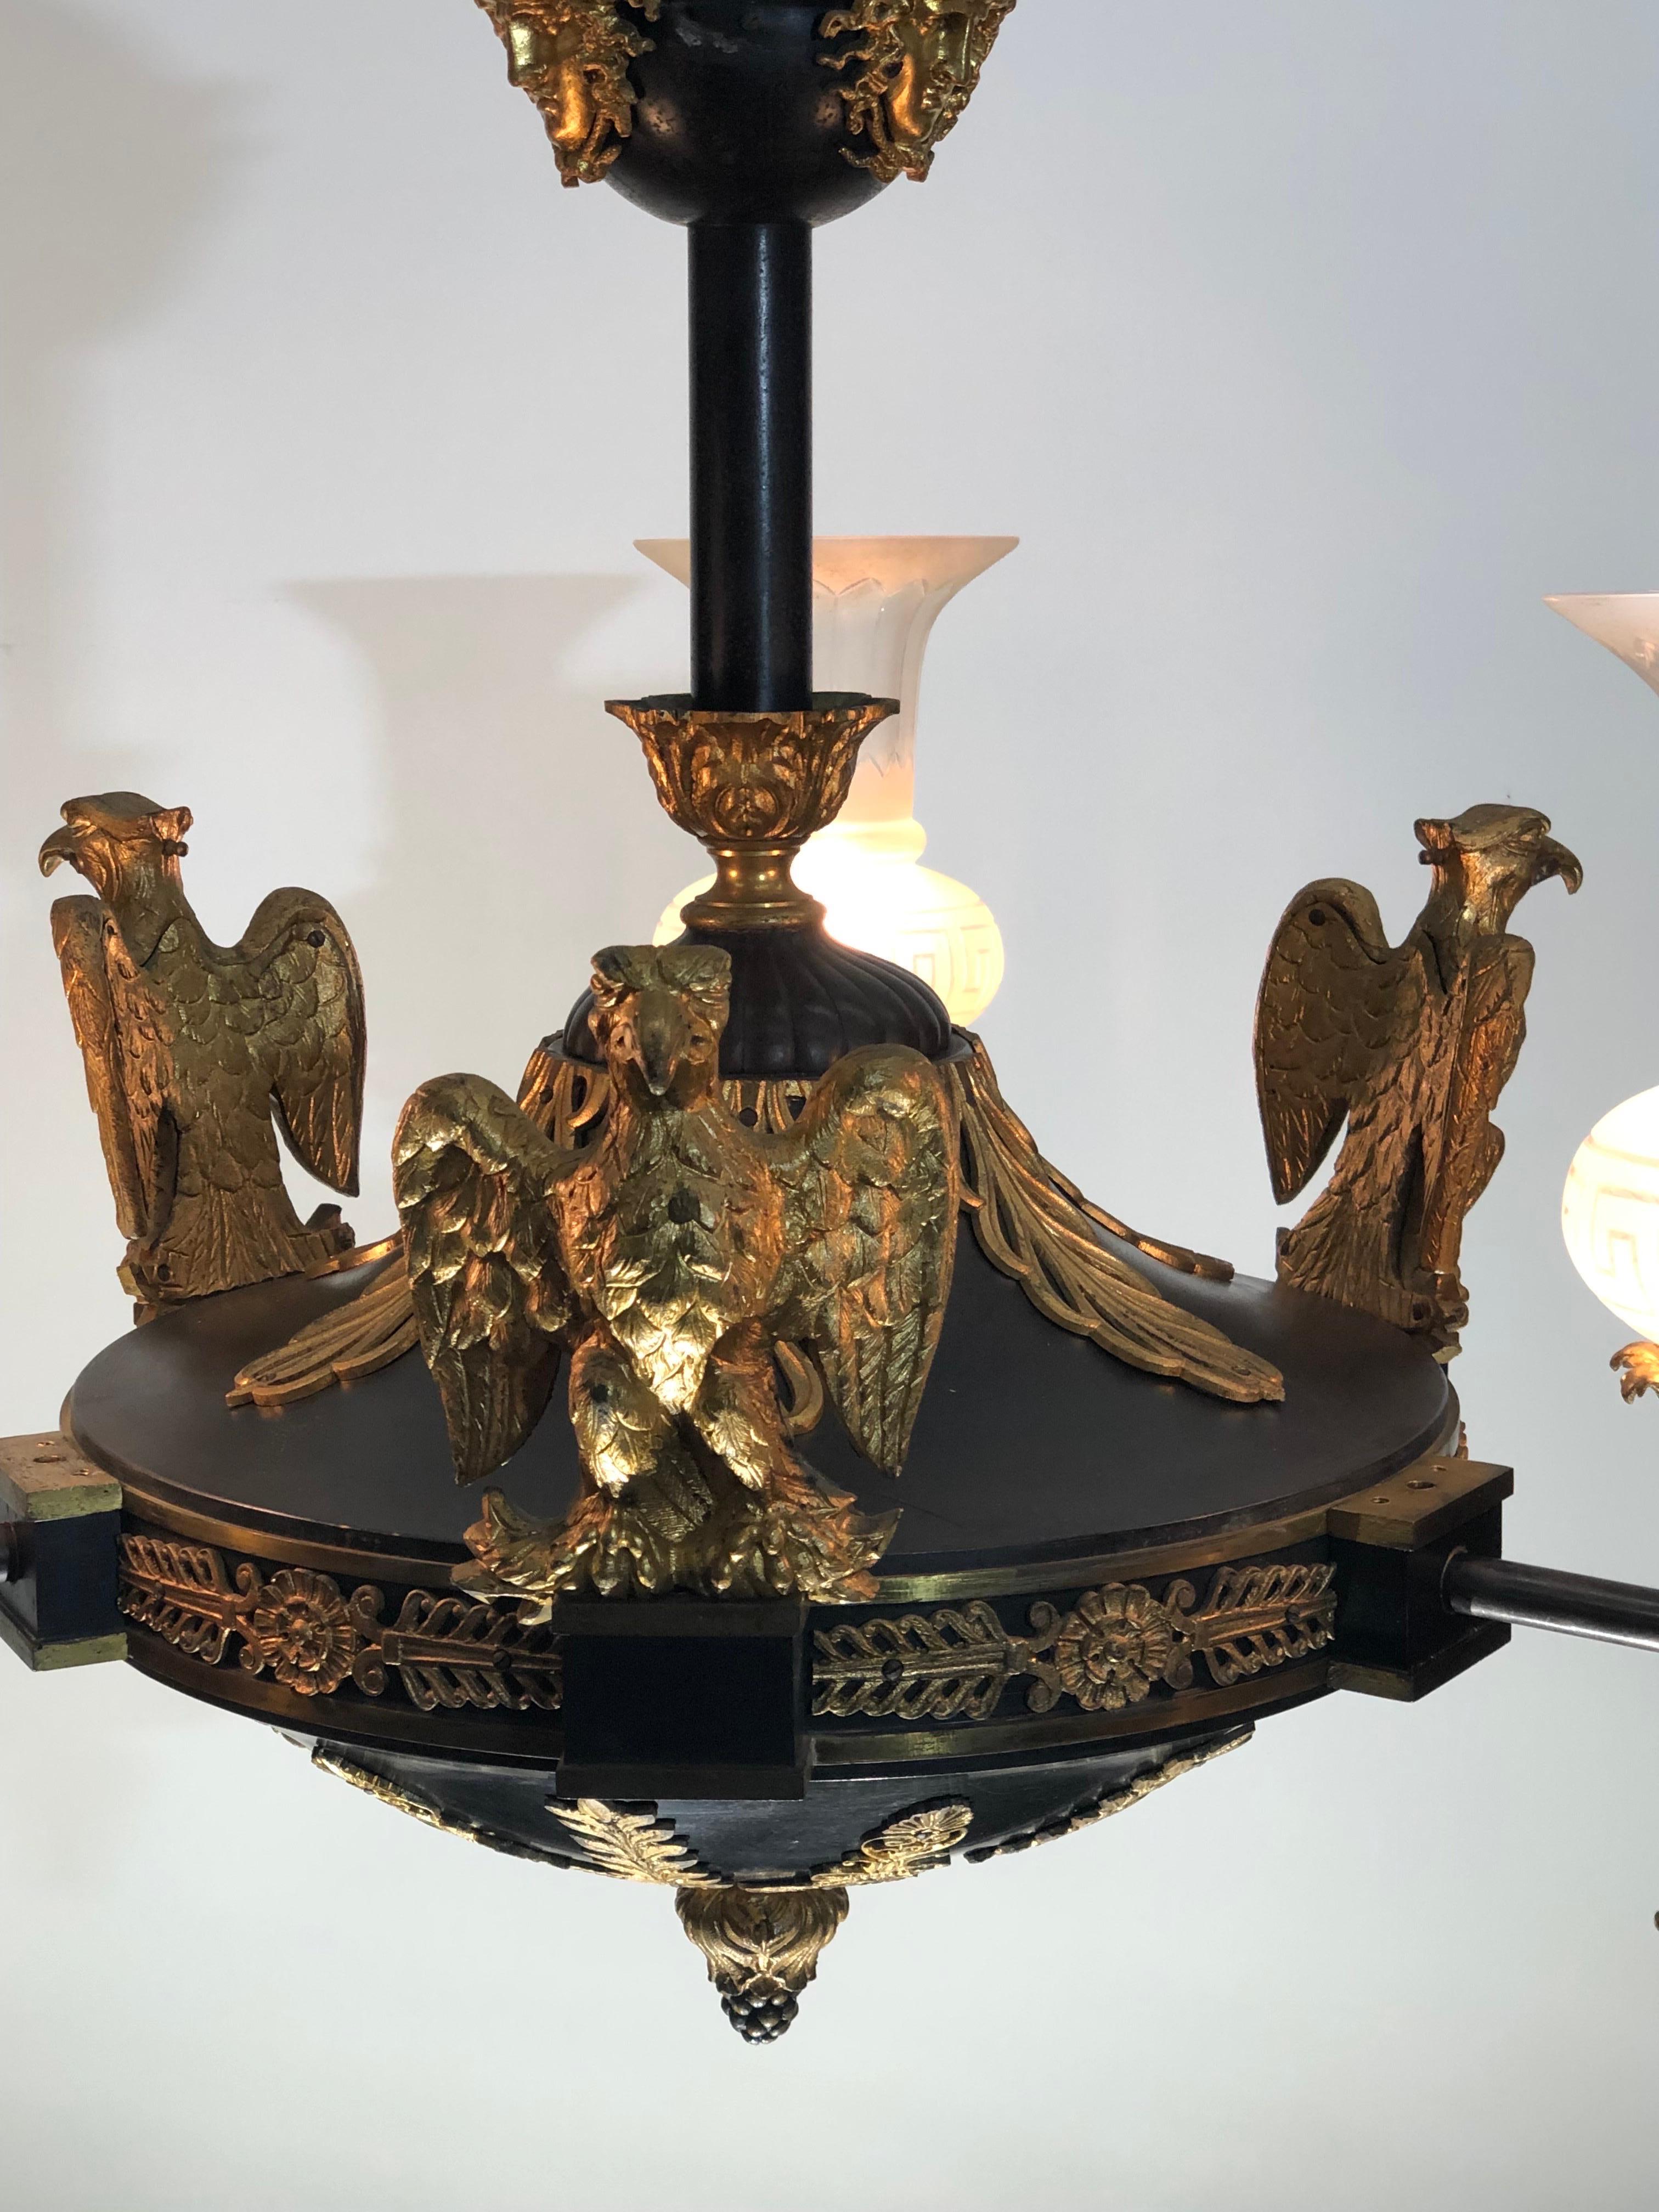  Medusa Rondanini and Eagle Mounted French Empire Bronze Gasolier / Chandelier For Sale 1